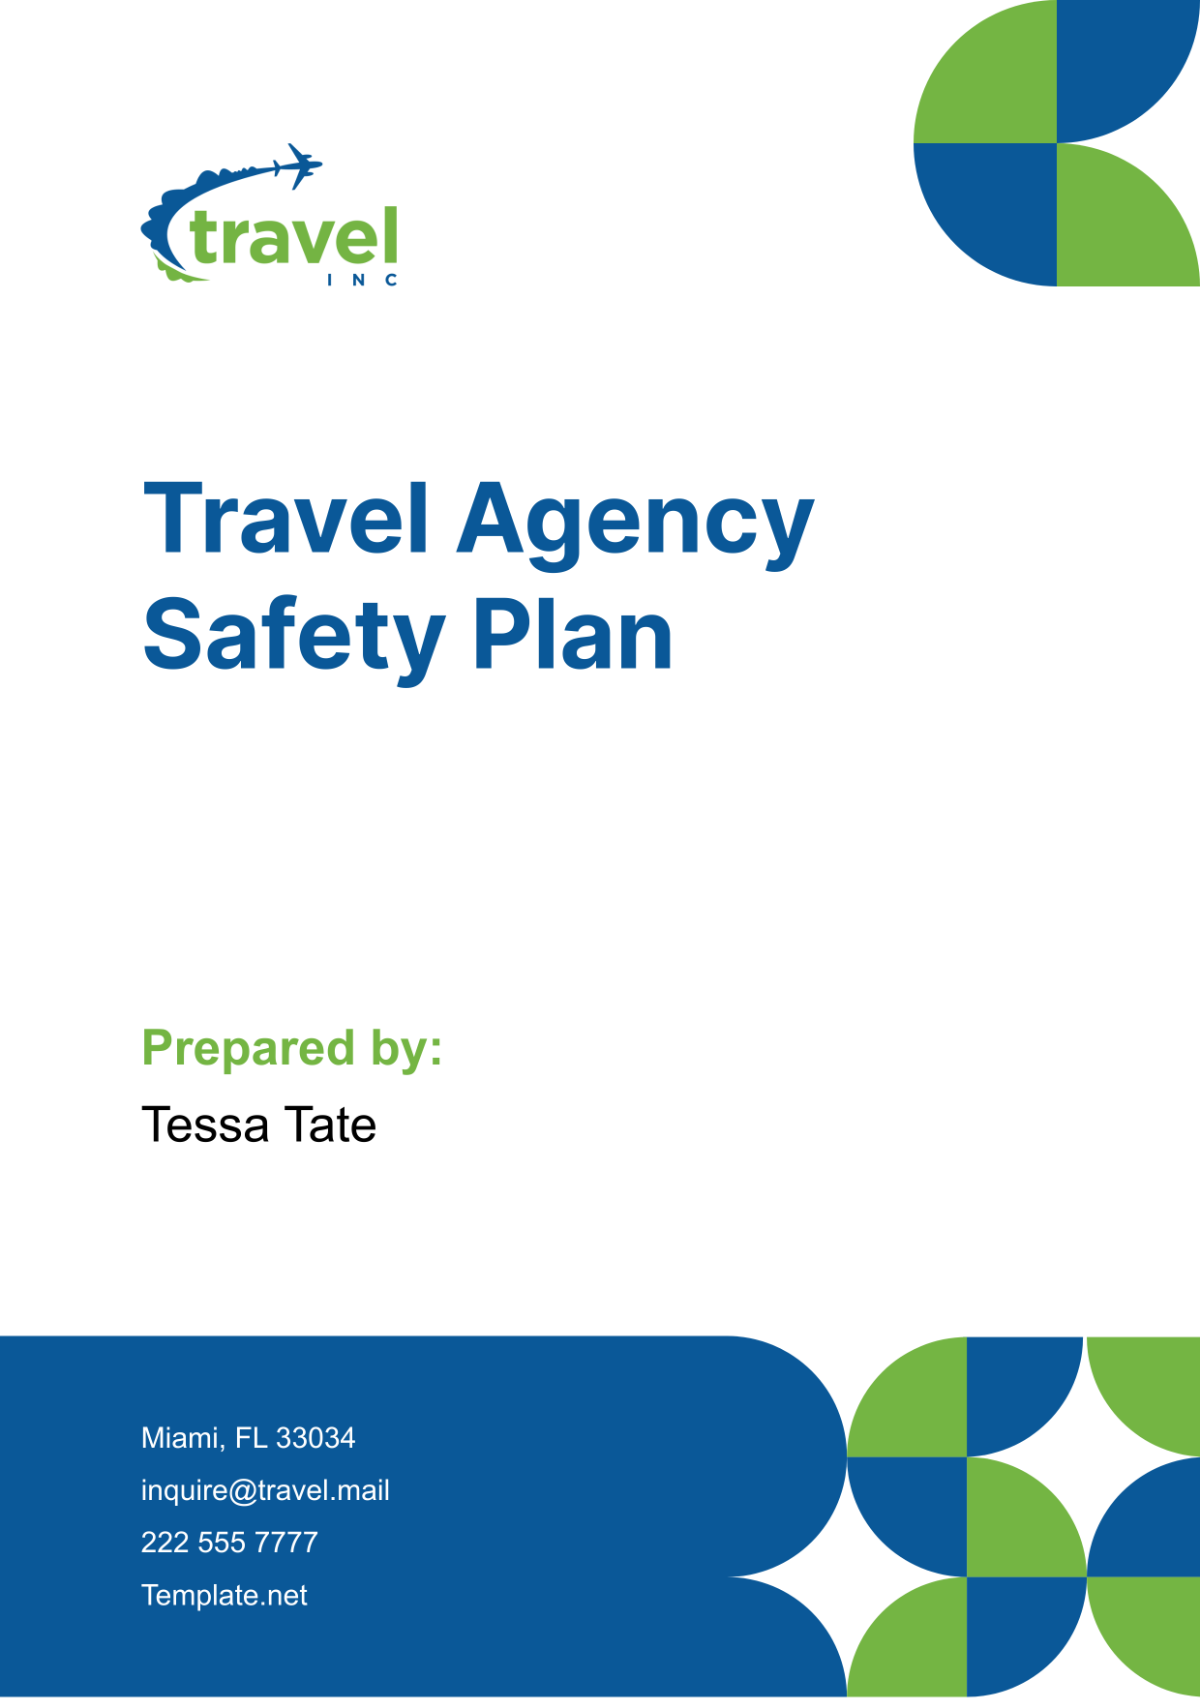 Travel Agency Safety Plan Template